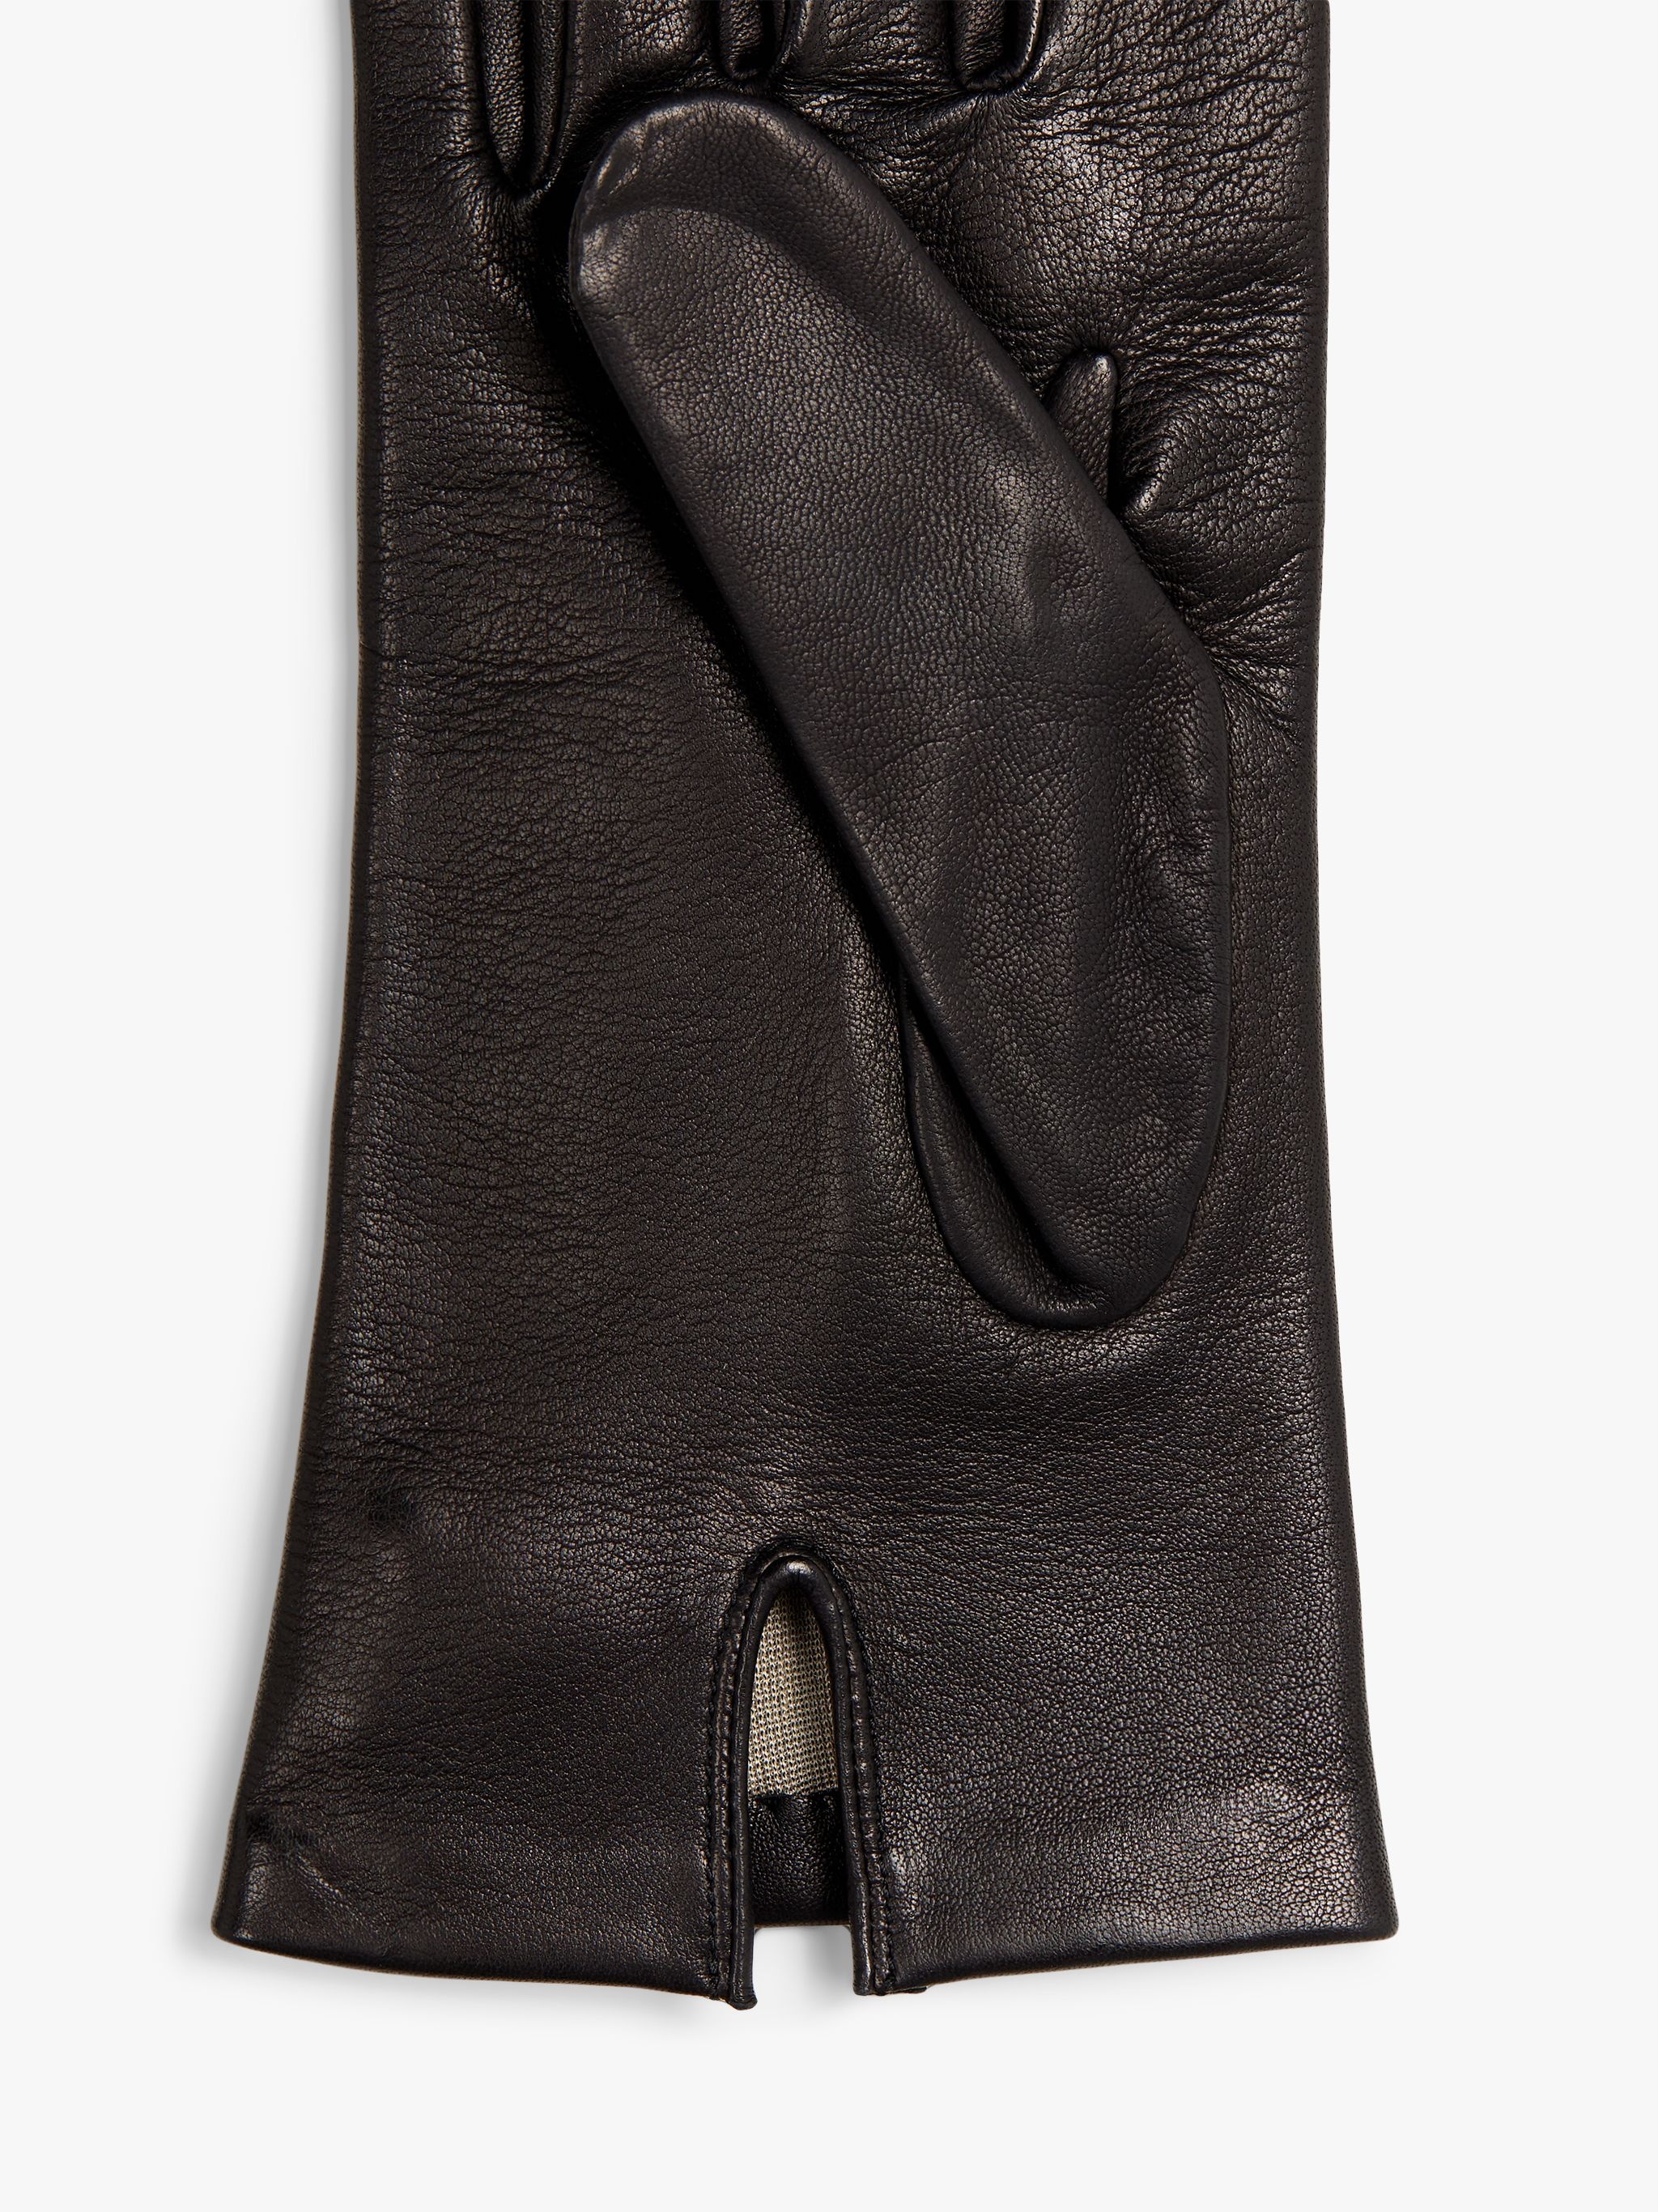 BLACK HAIRSHEEP LEATHER SILK LINED GLOVES - 2